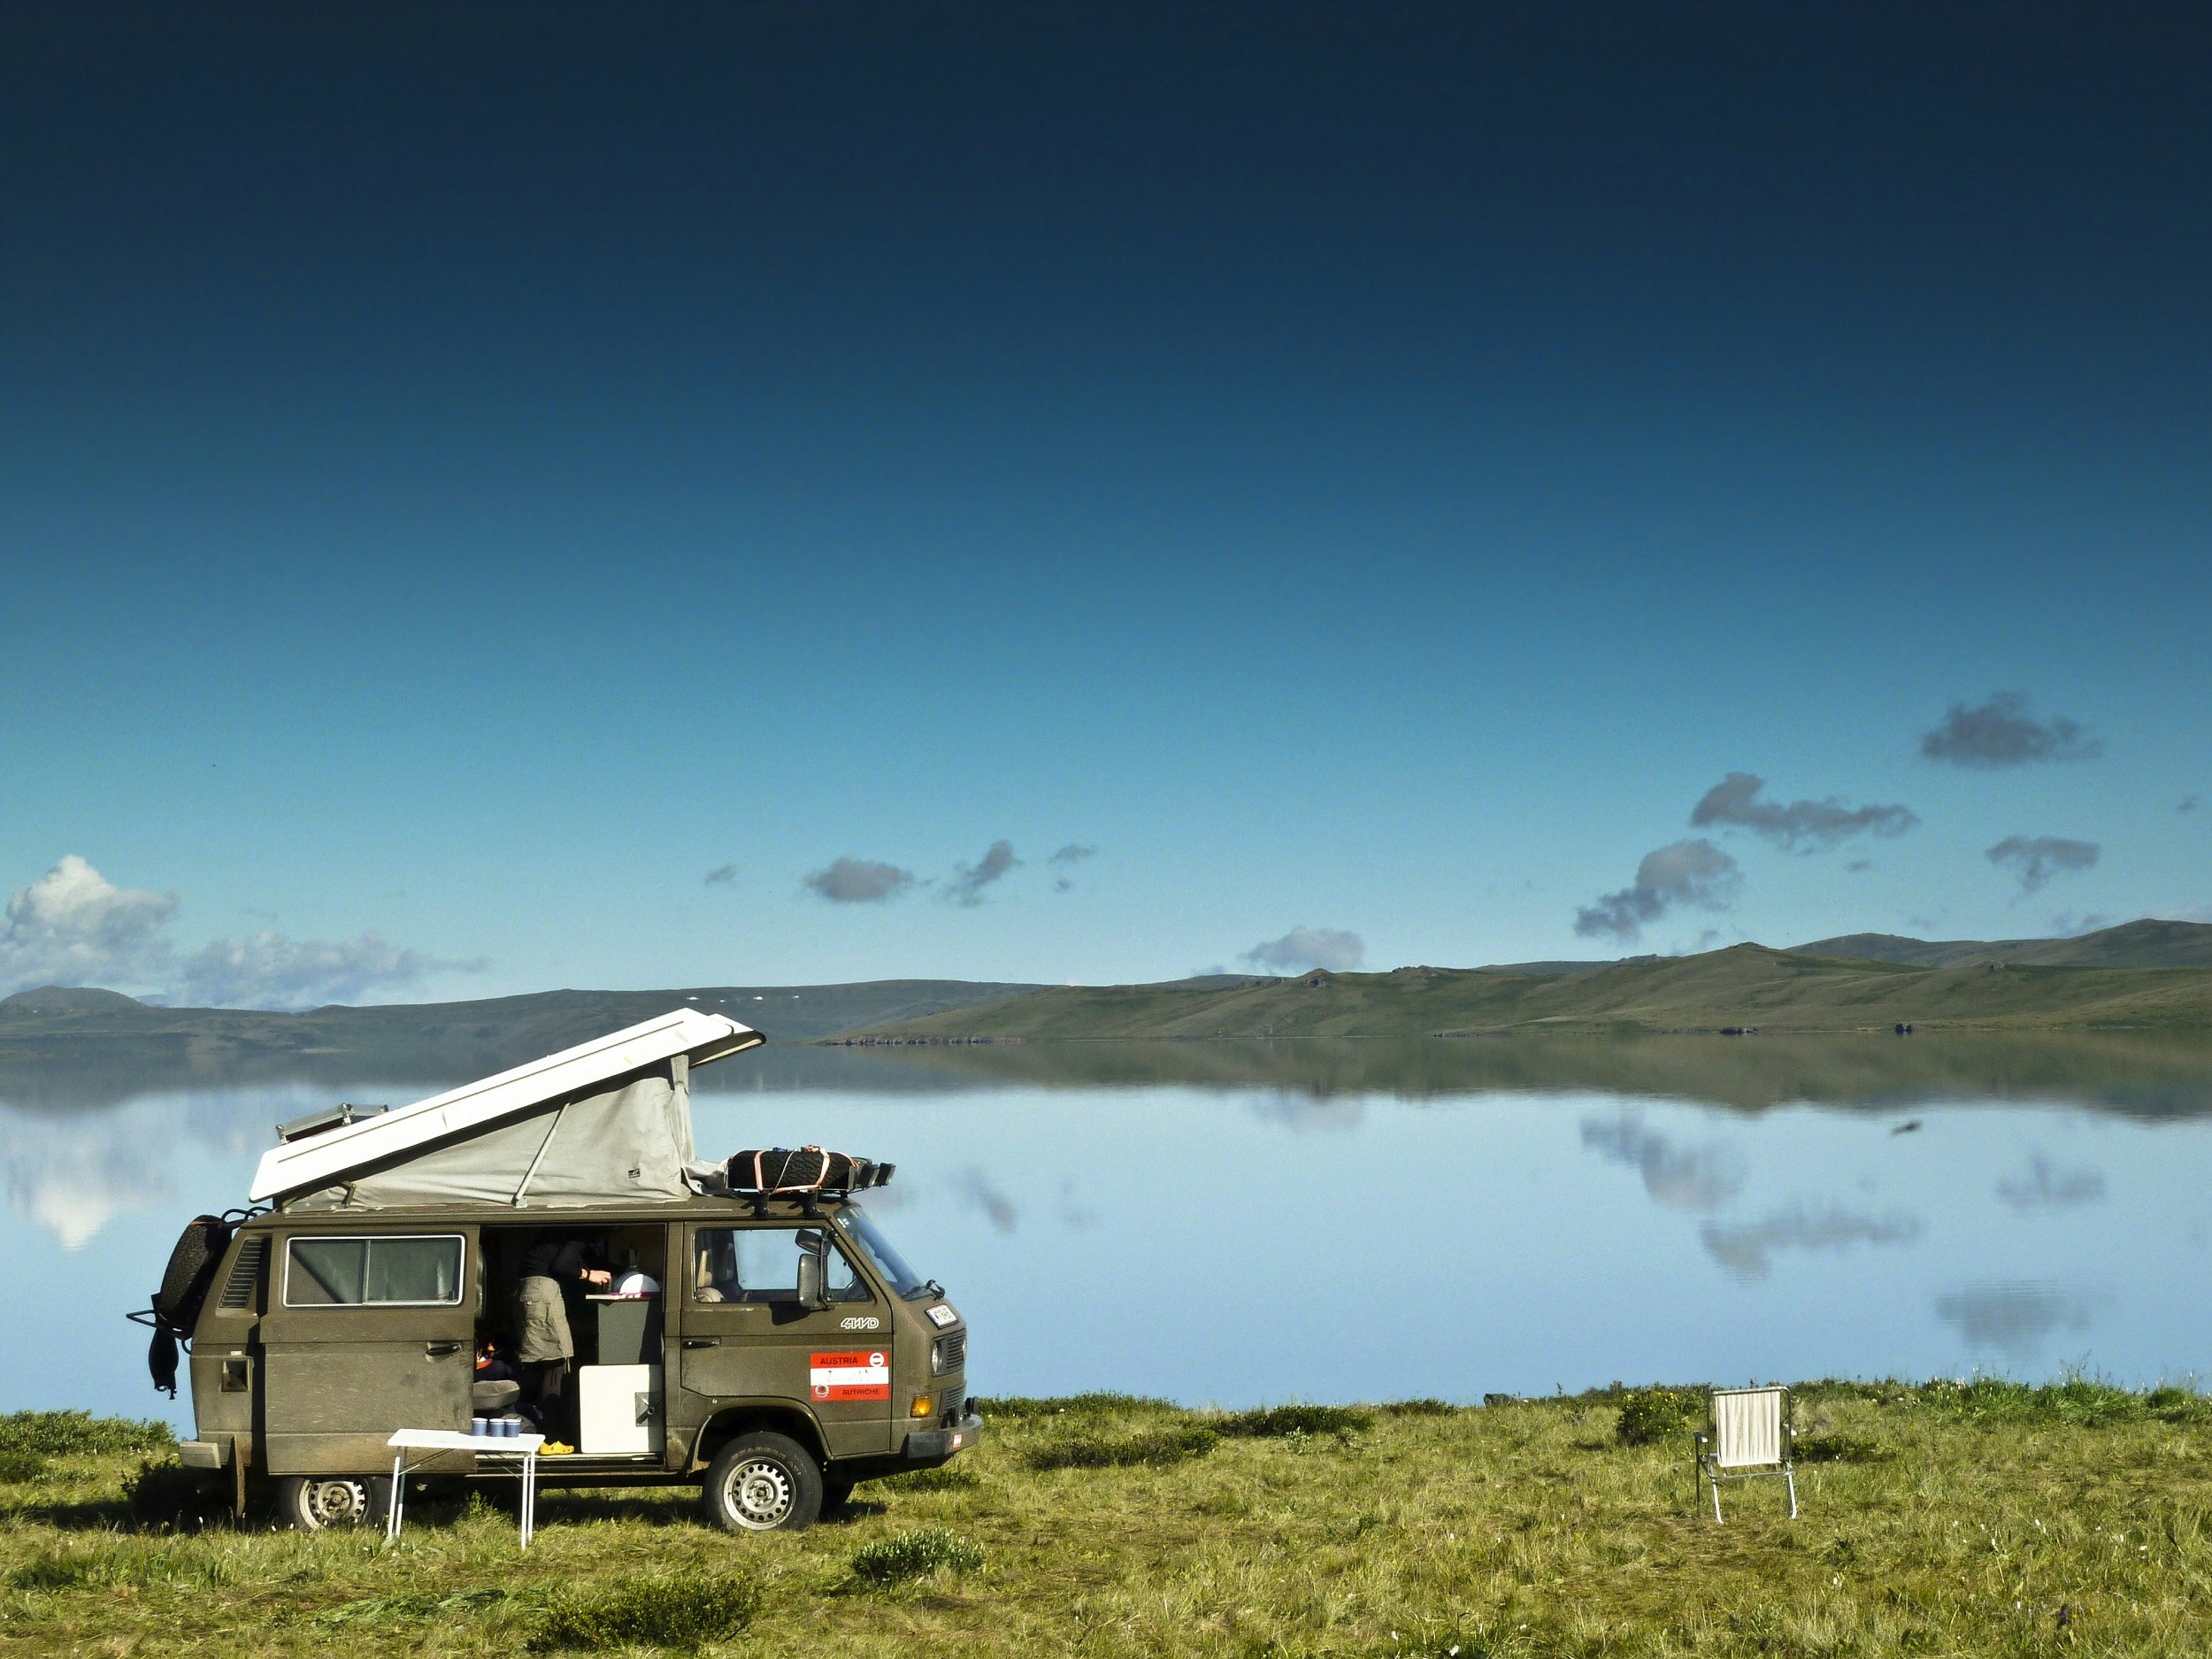 A van with its roof popped open is parked beside a vast lake